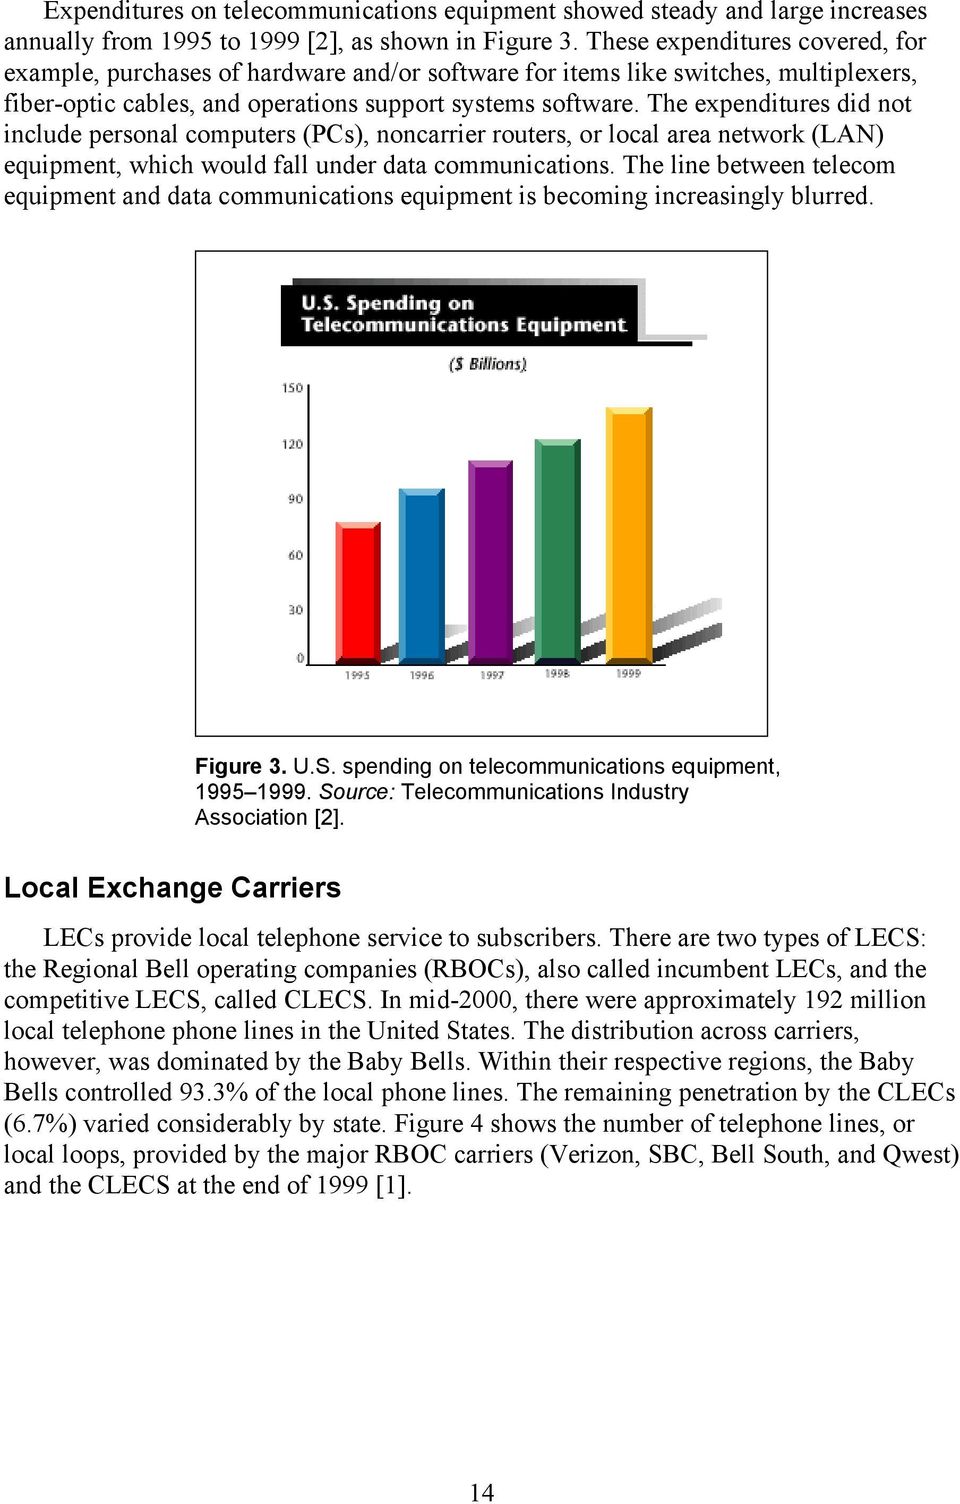 The expenditures did not include personal computers (PCs), noncarrier routers, or local area network (LAN) equipment, which would fall under data communications.